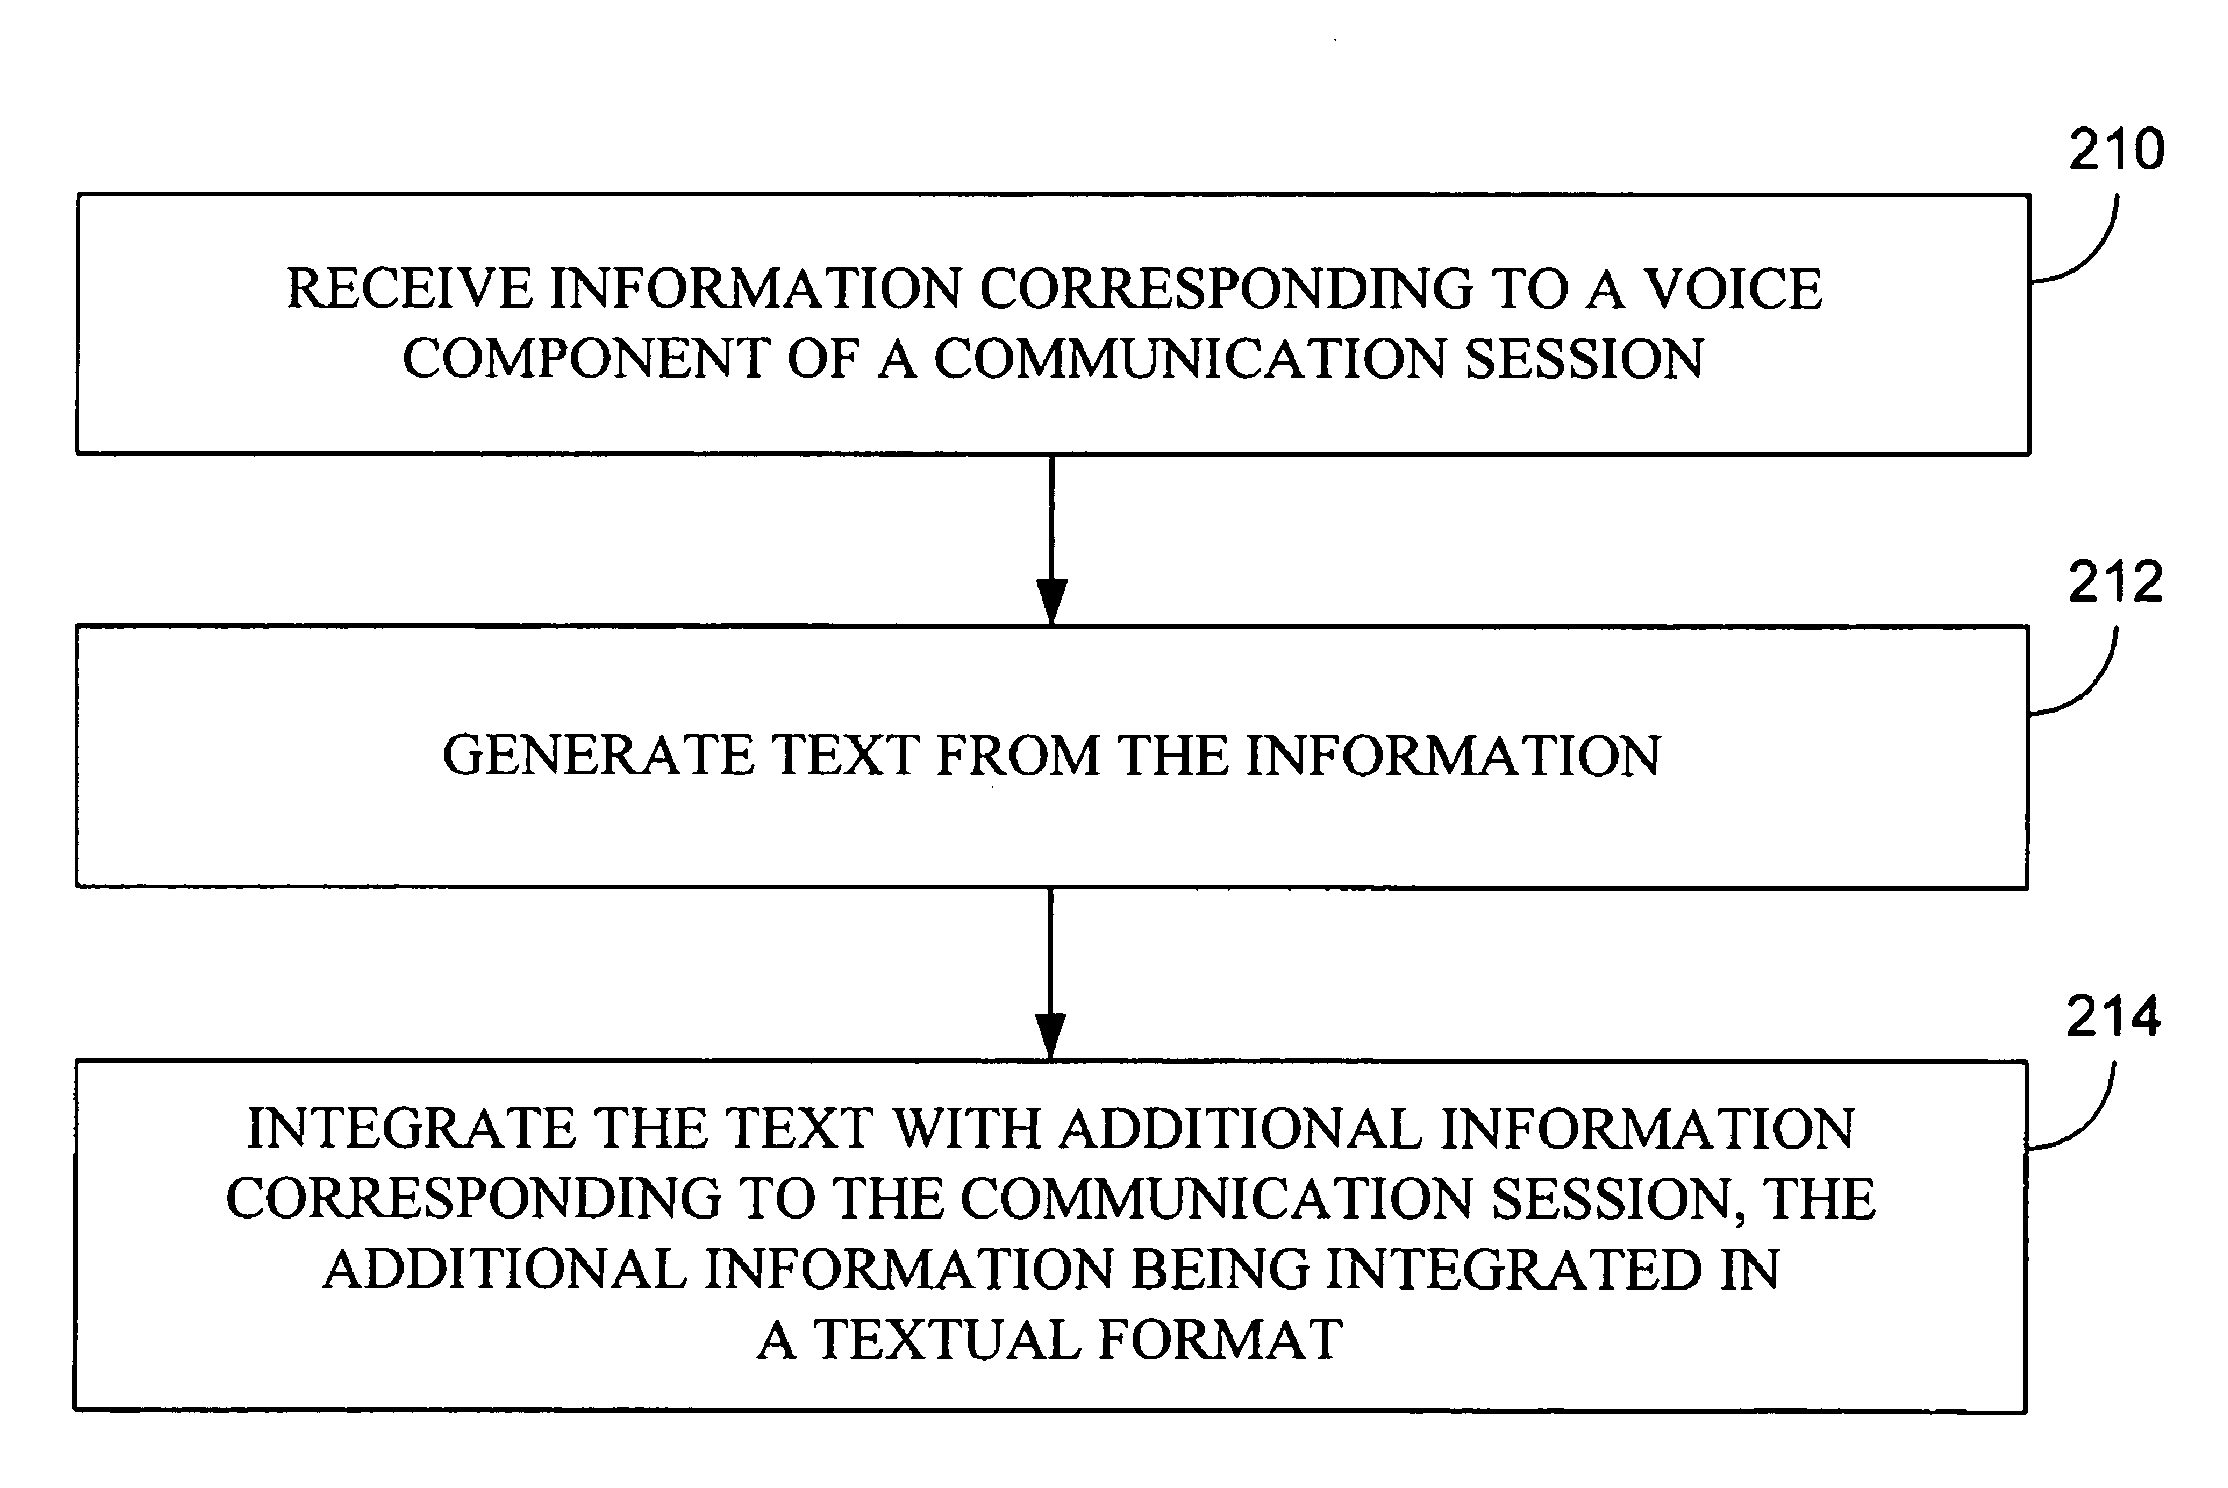 Analyzing audio components and generating text with integrated additional session information